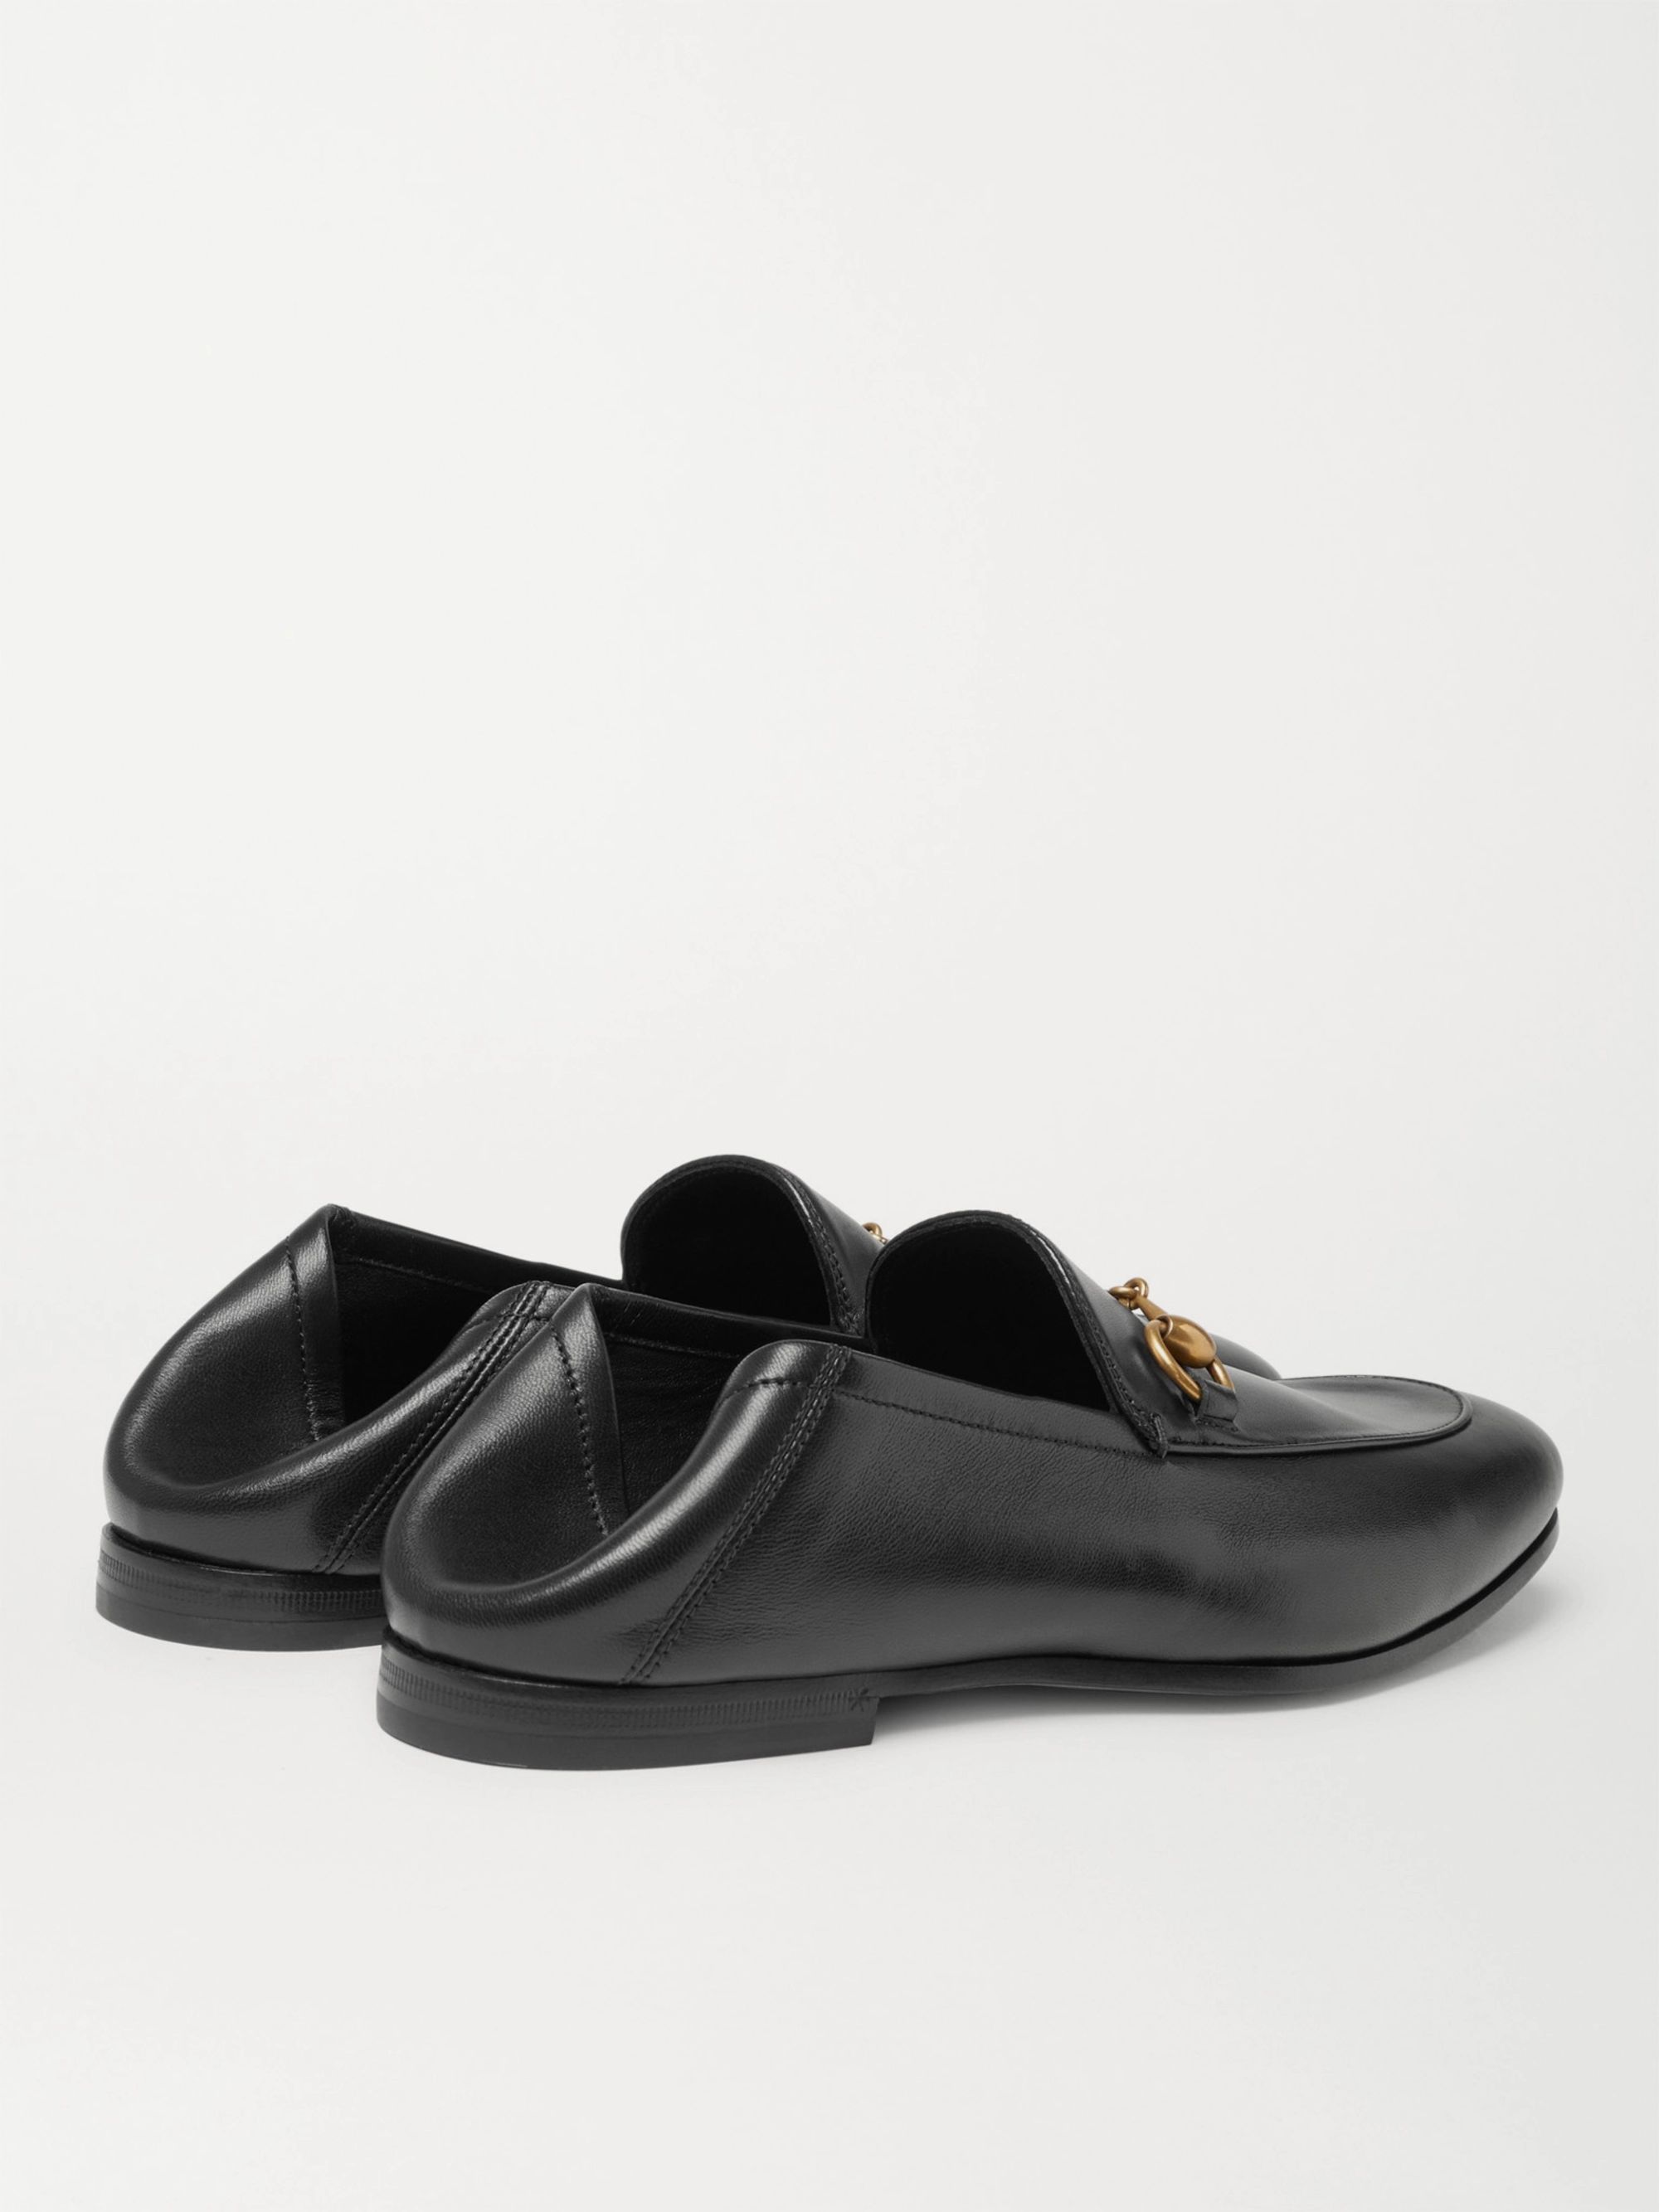 gucci brixton leather horsebit loafers